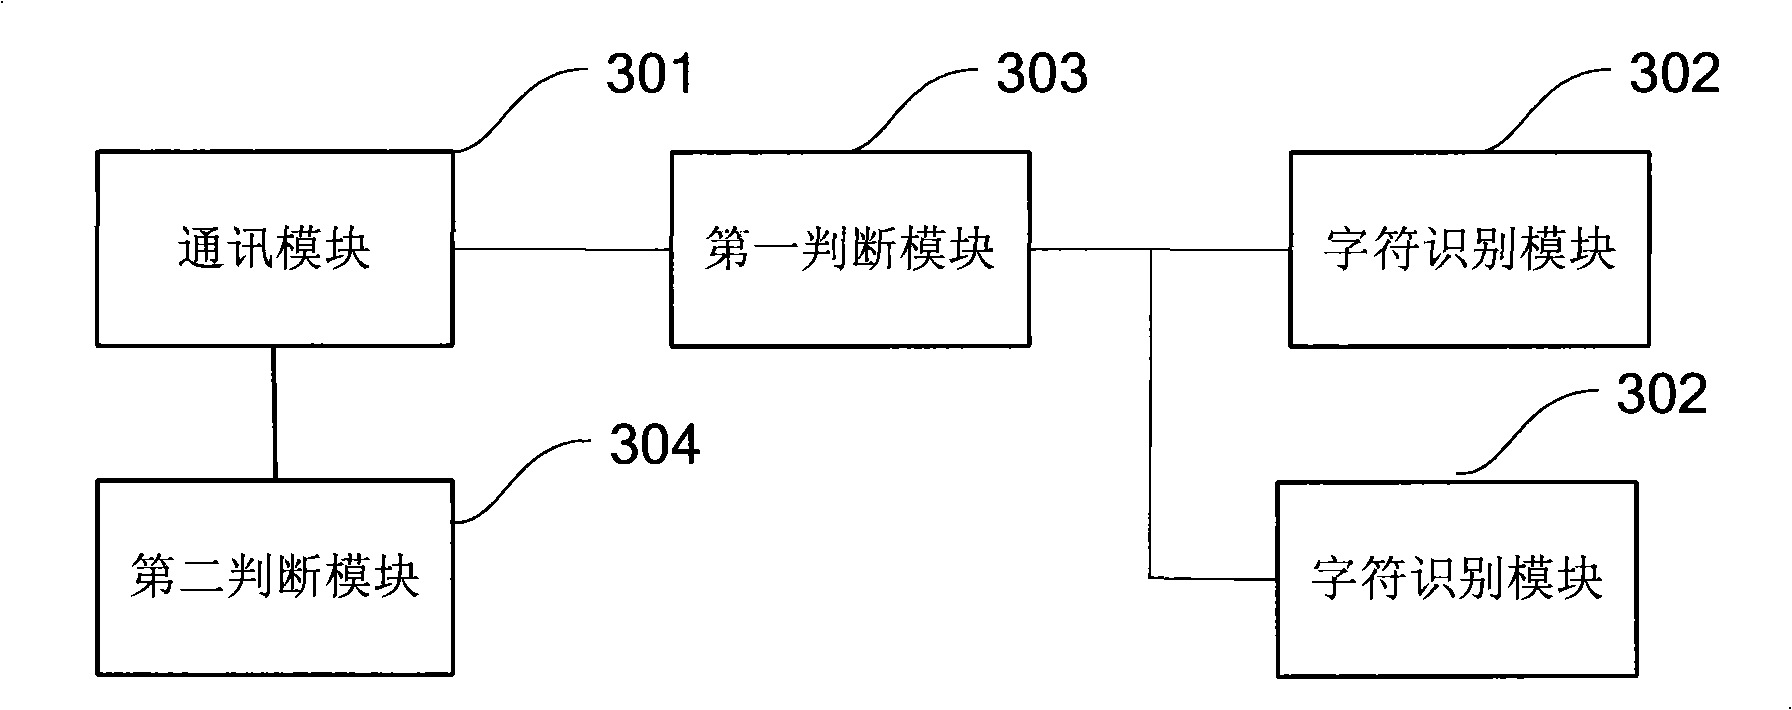 Method for conversing image and content, mobile terminal and OCR server